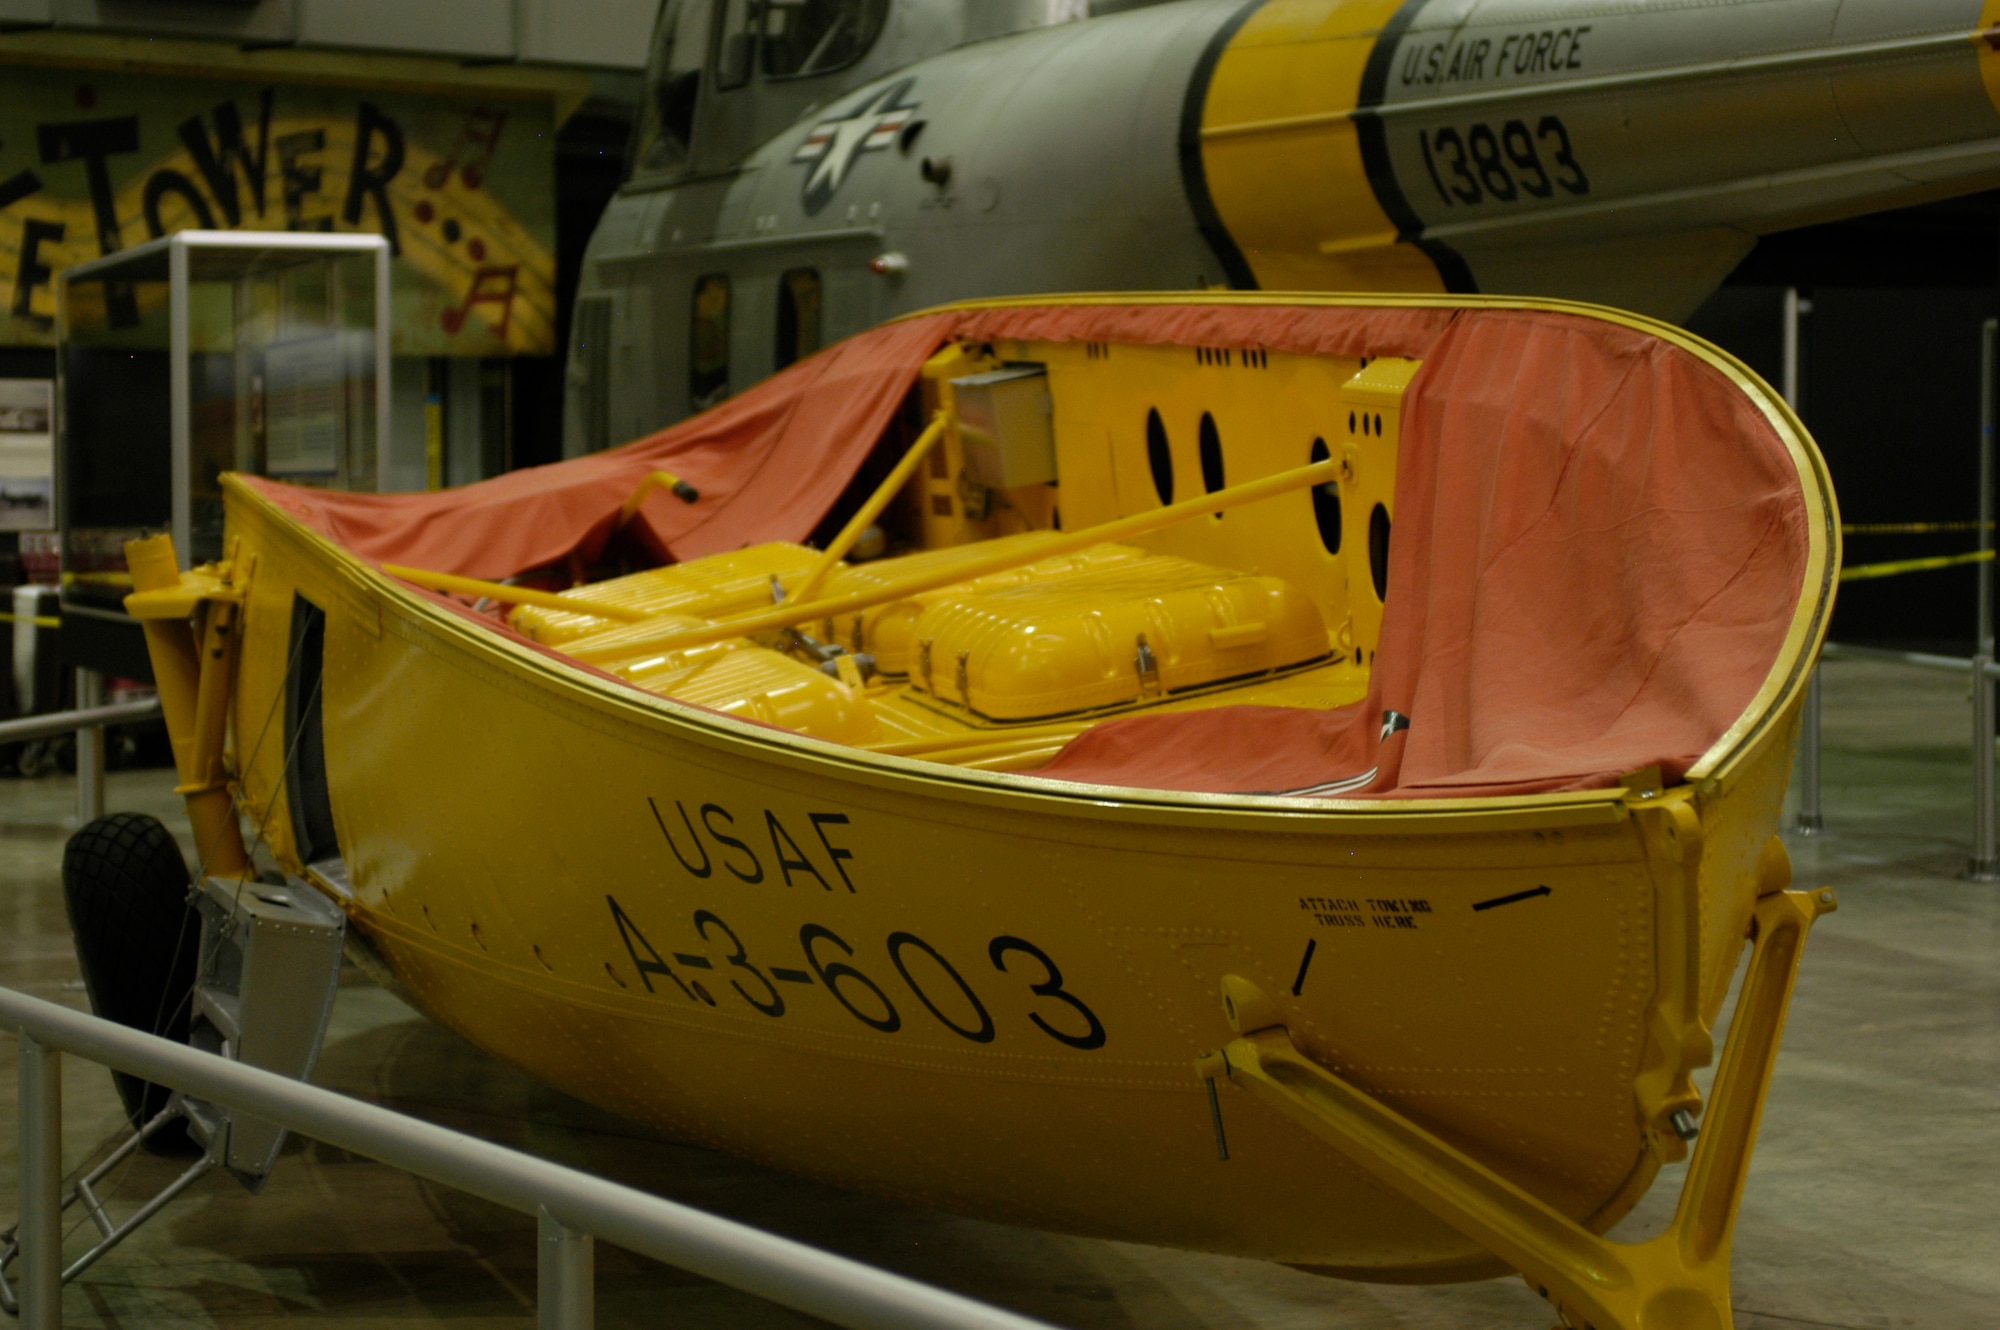 DAYTON, Ohio - A-3 lifeboat on display in the Korean War Gallery at the National Museum of the U.S. Air Force. (U.S. Air Force photo)